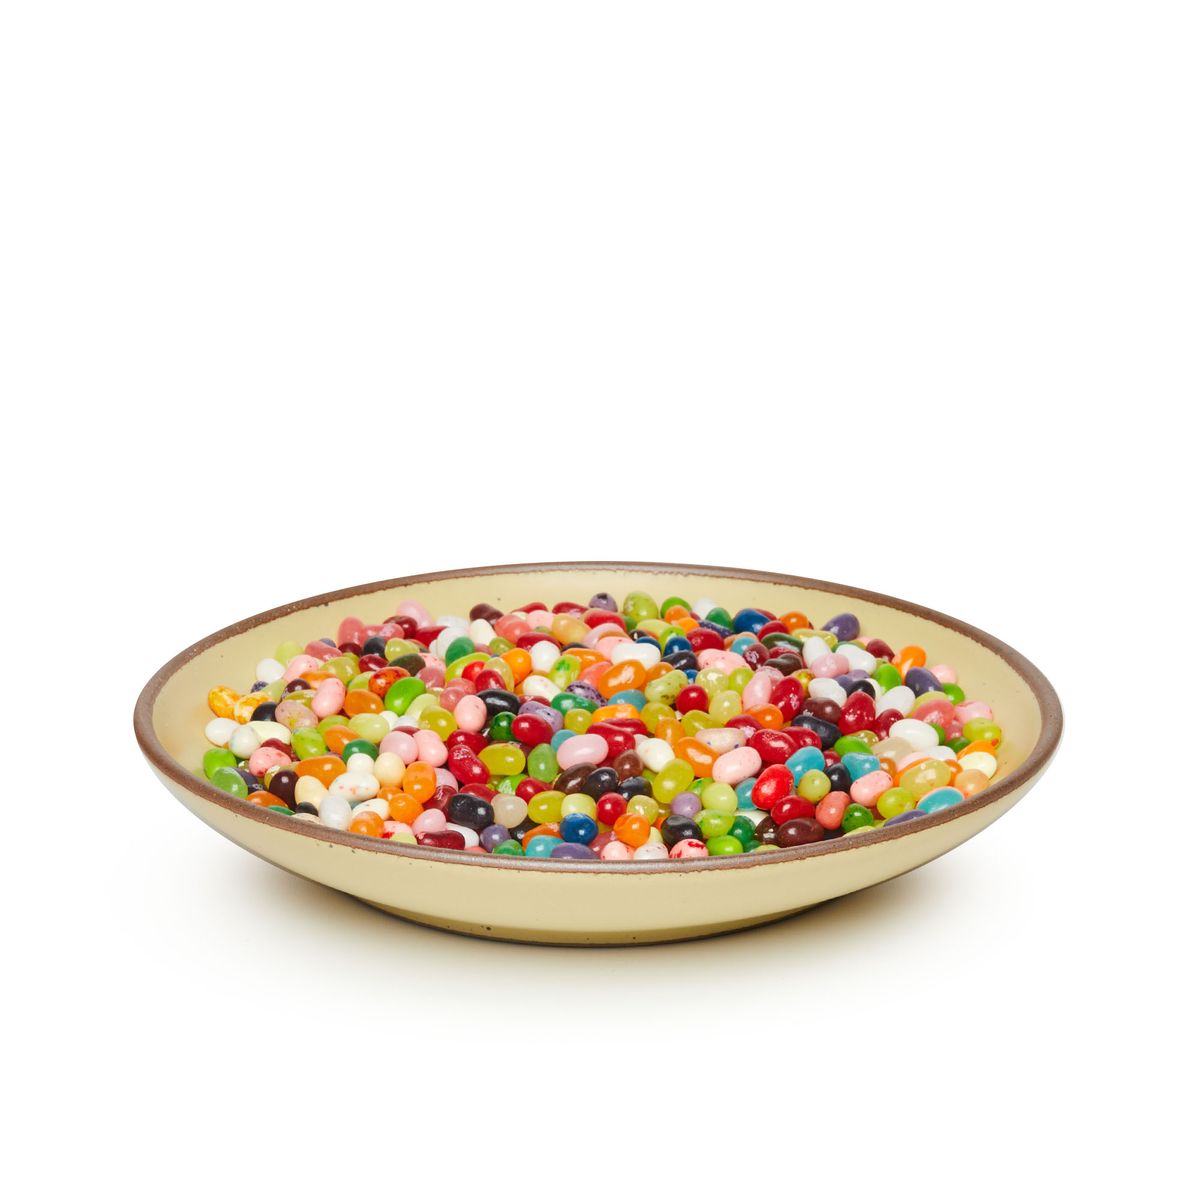 Jelly beans on a large ceramic plate with a curved bowl edge in a light butter yellow color featuring iron speckles and an unglazed rim